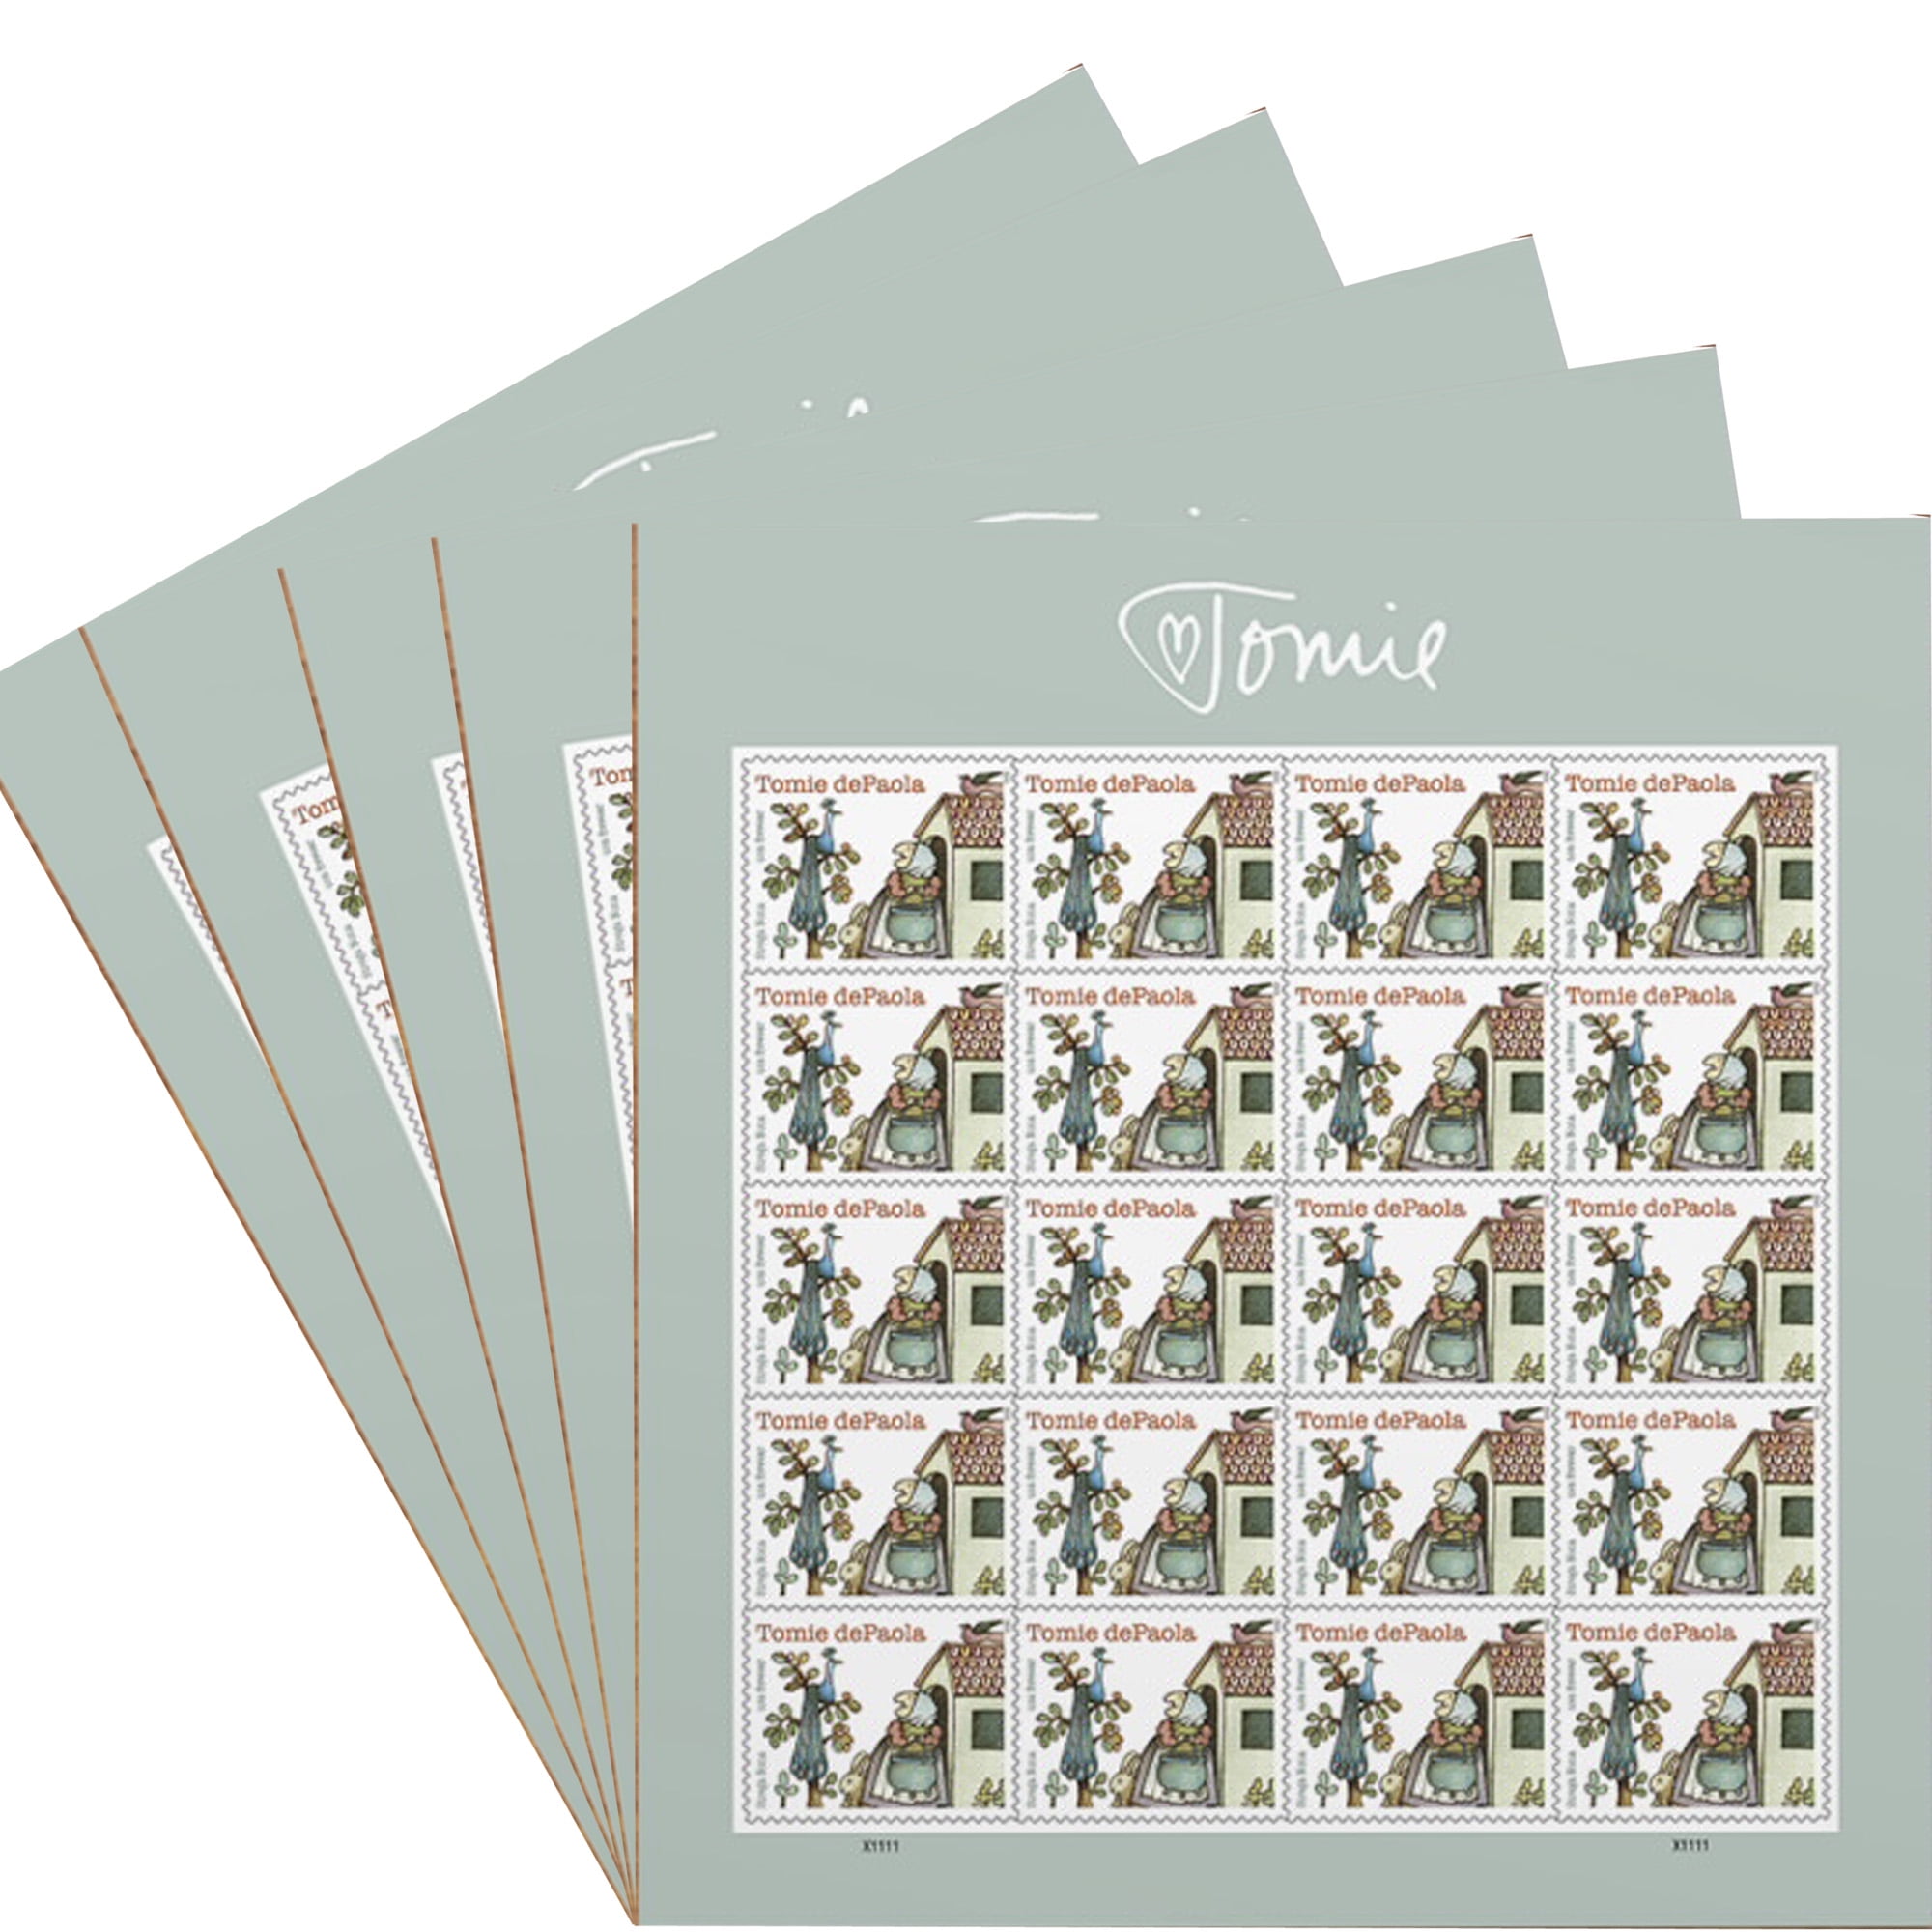 Mountain Flora USPS Forever Postage Stamp 1 Book of 20 US First Class  Wedding Celebration Anniversary Flower Party (20 Stamps)